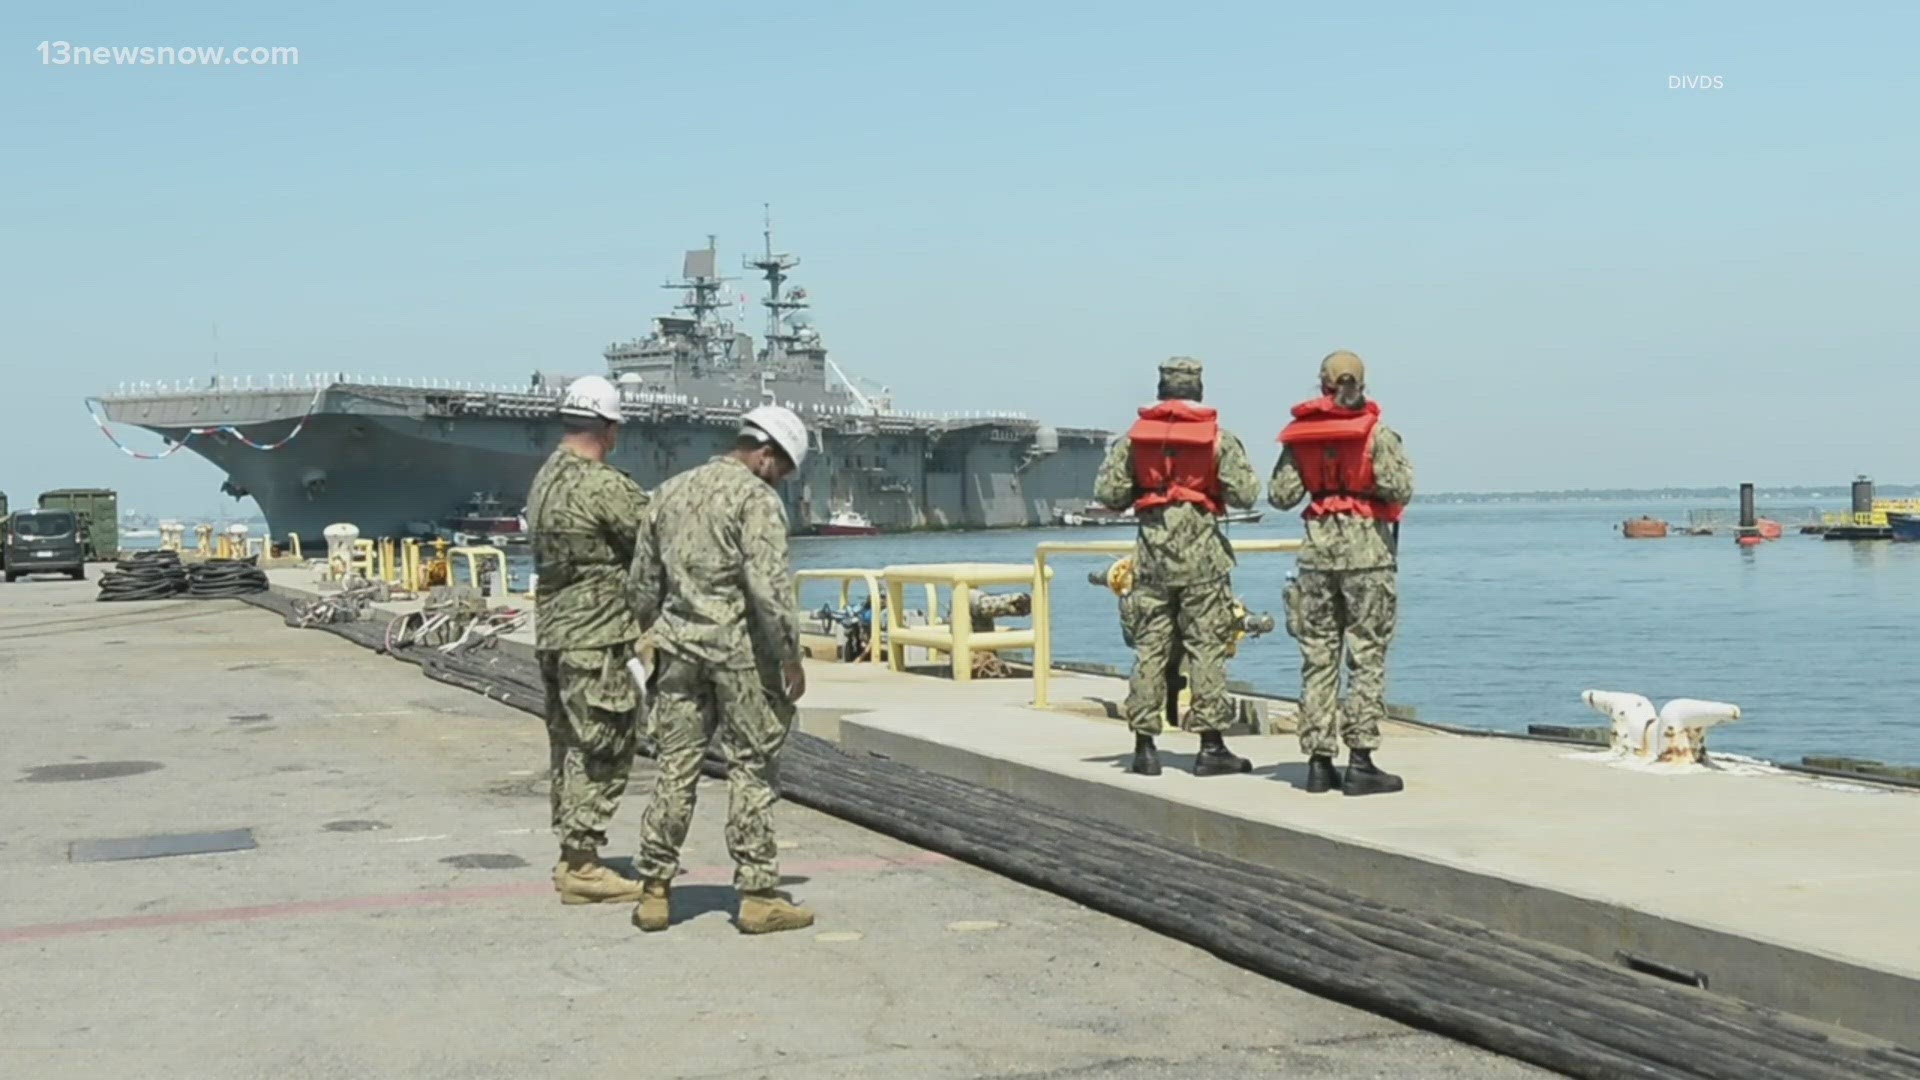 On Tuesday, the Pentagon announced that the USS Bataan amphibious ready group carrying Navy sailors and Marines is shipping off to the Middle East.